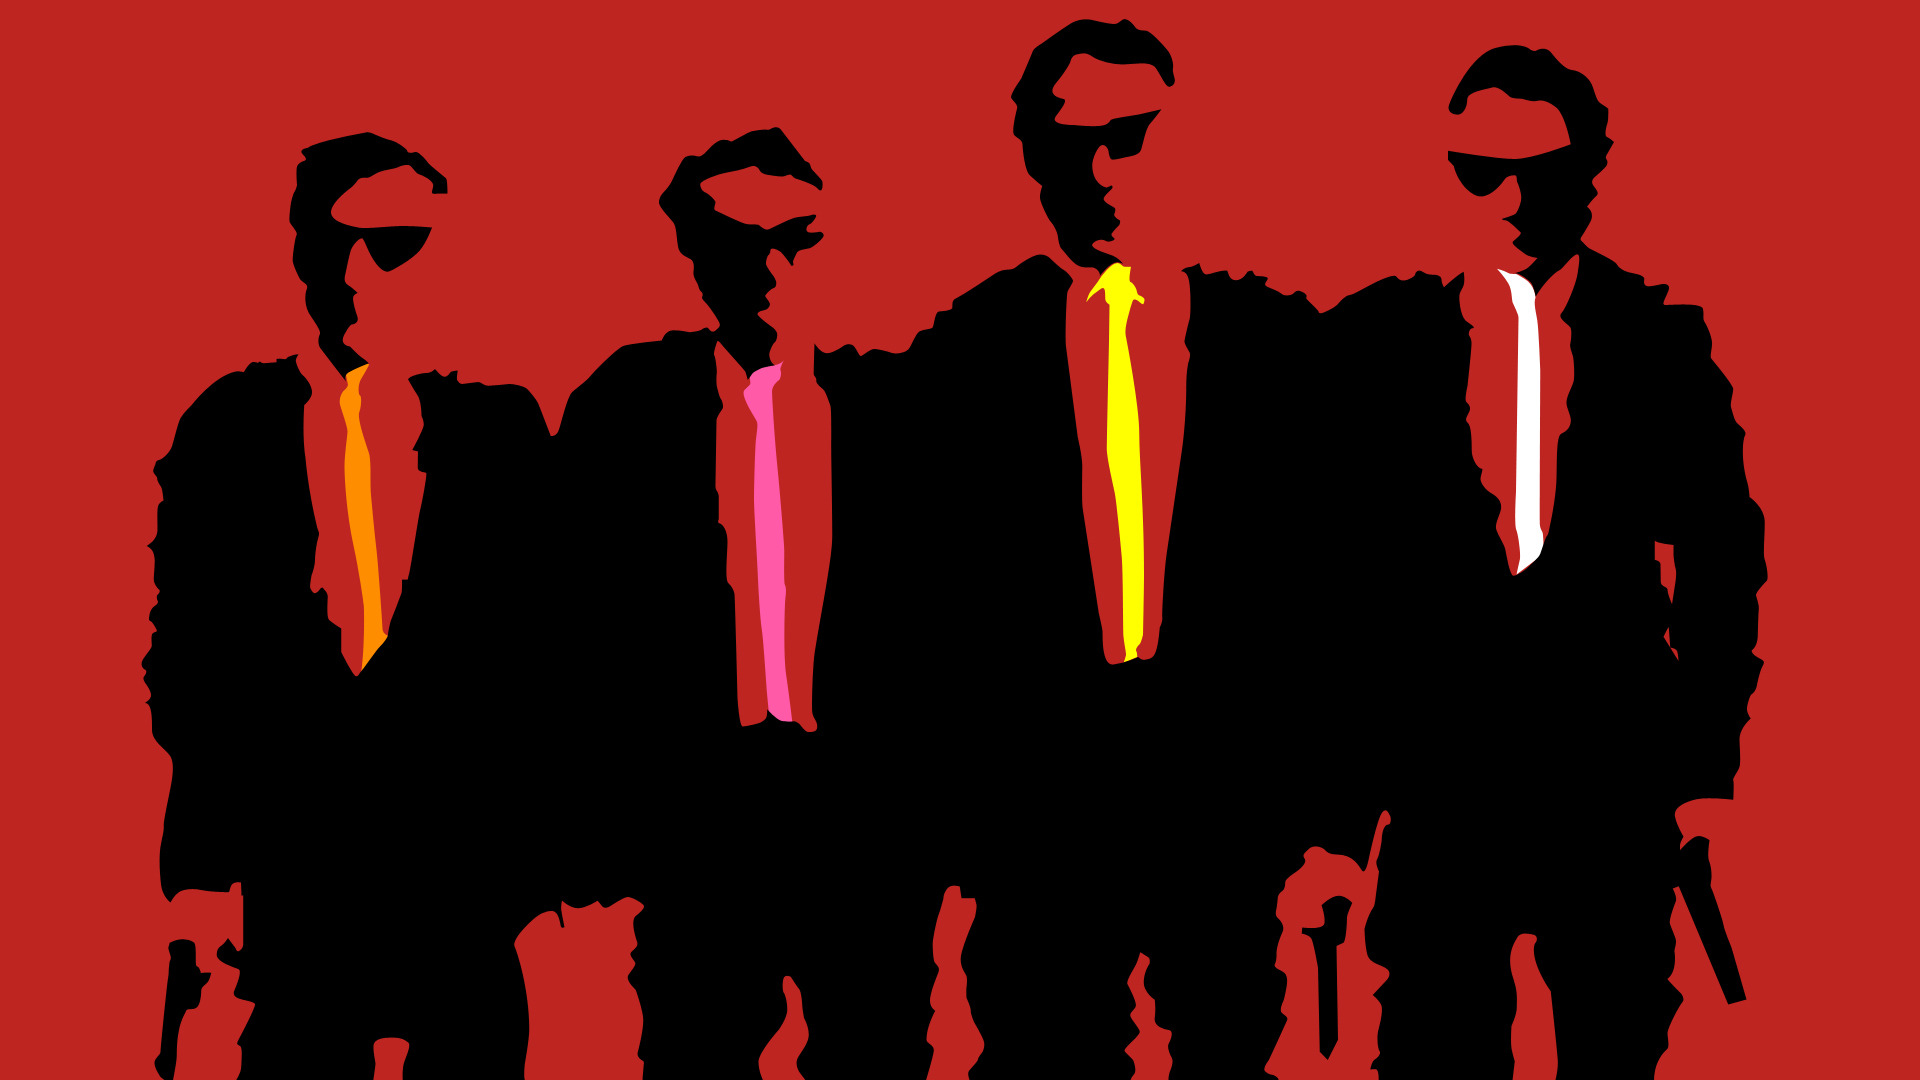 Movie Reservoir Dogs HD Wallpaper | Background Image